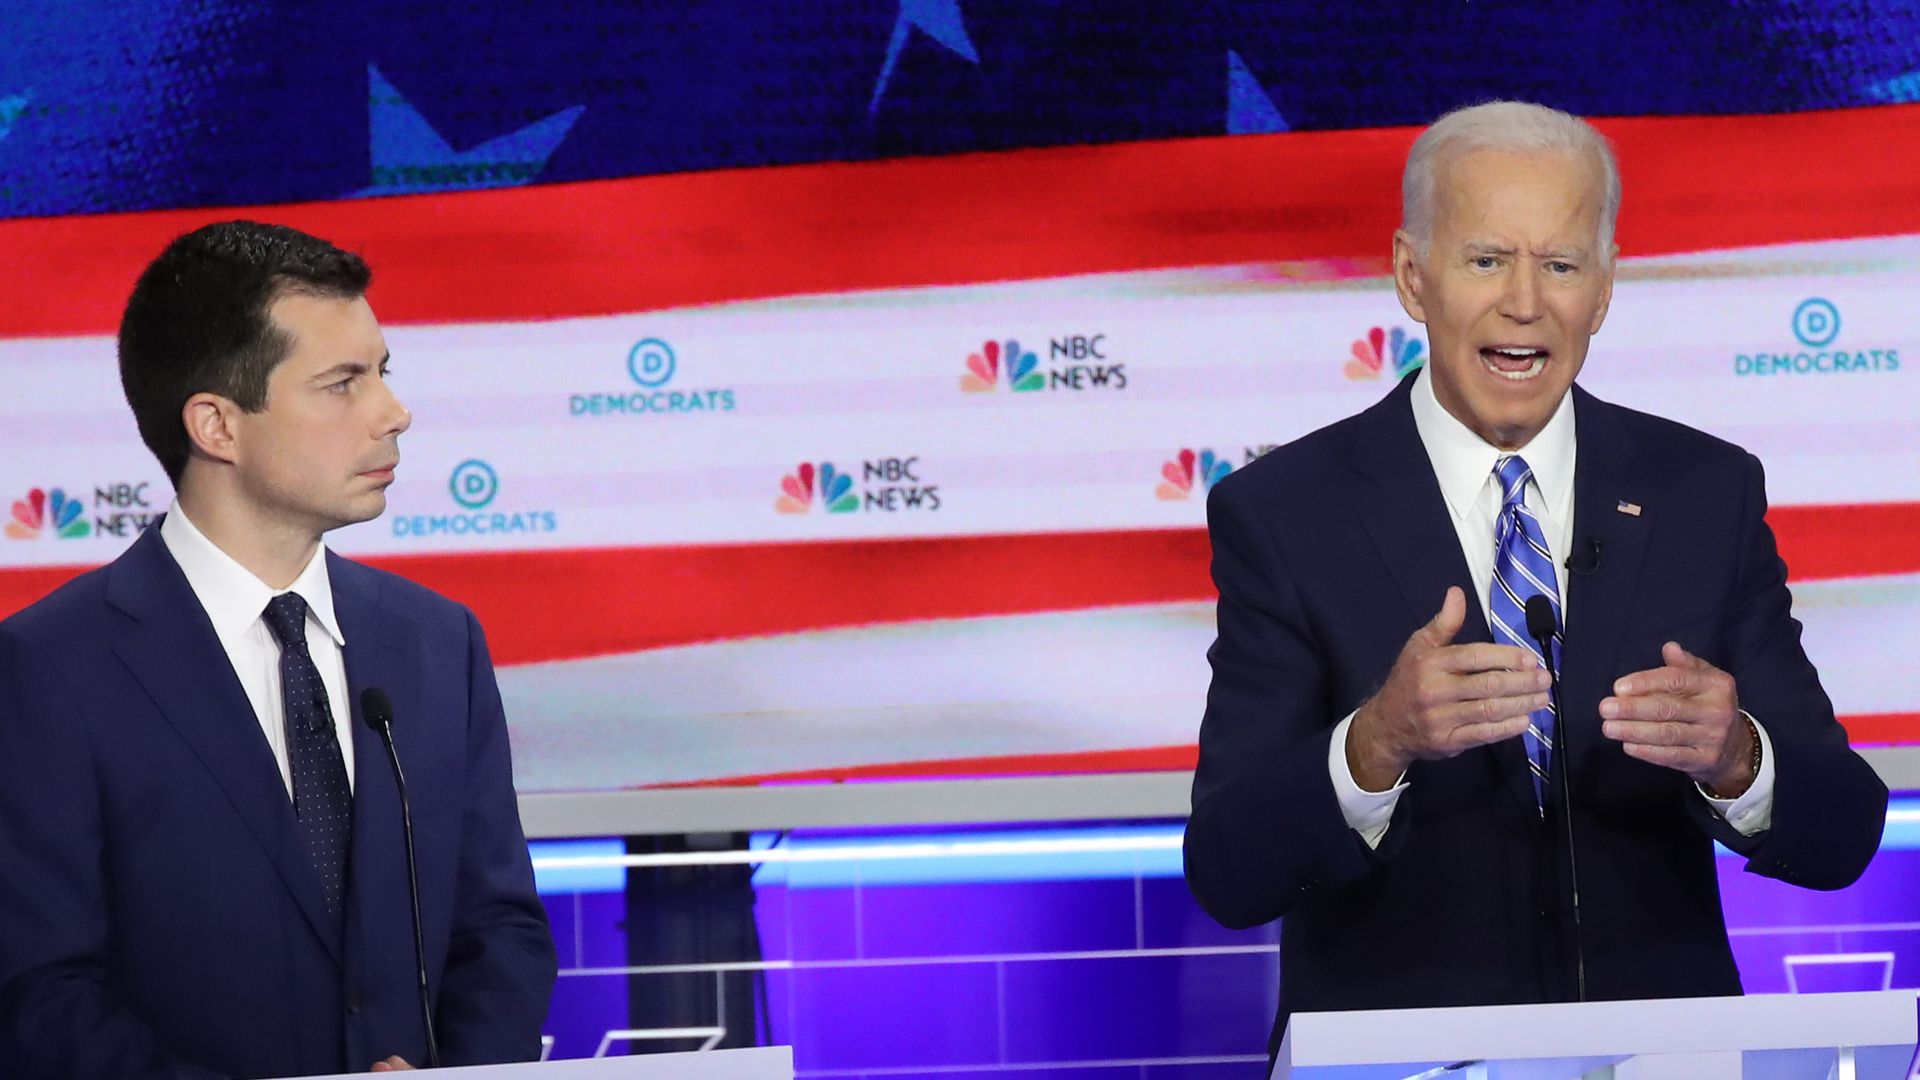  Democratic presidential candidates (L-R) South Bend, Indiana Mayor Pete Buttigieg, former Vice President Joe Biden  in the first Democratic presidential debate on June 27, 2019 in Miami, Florida. 